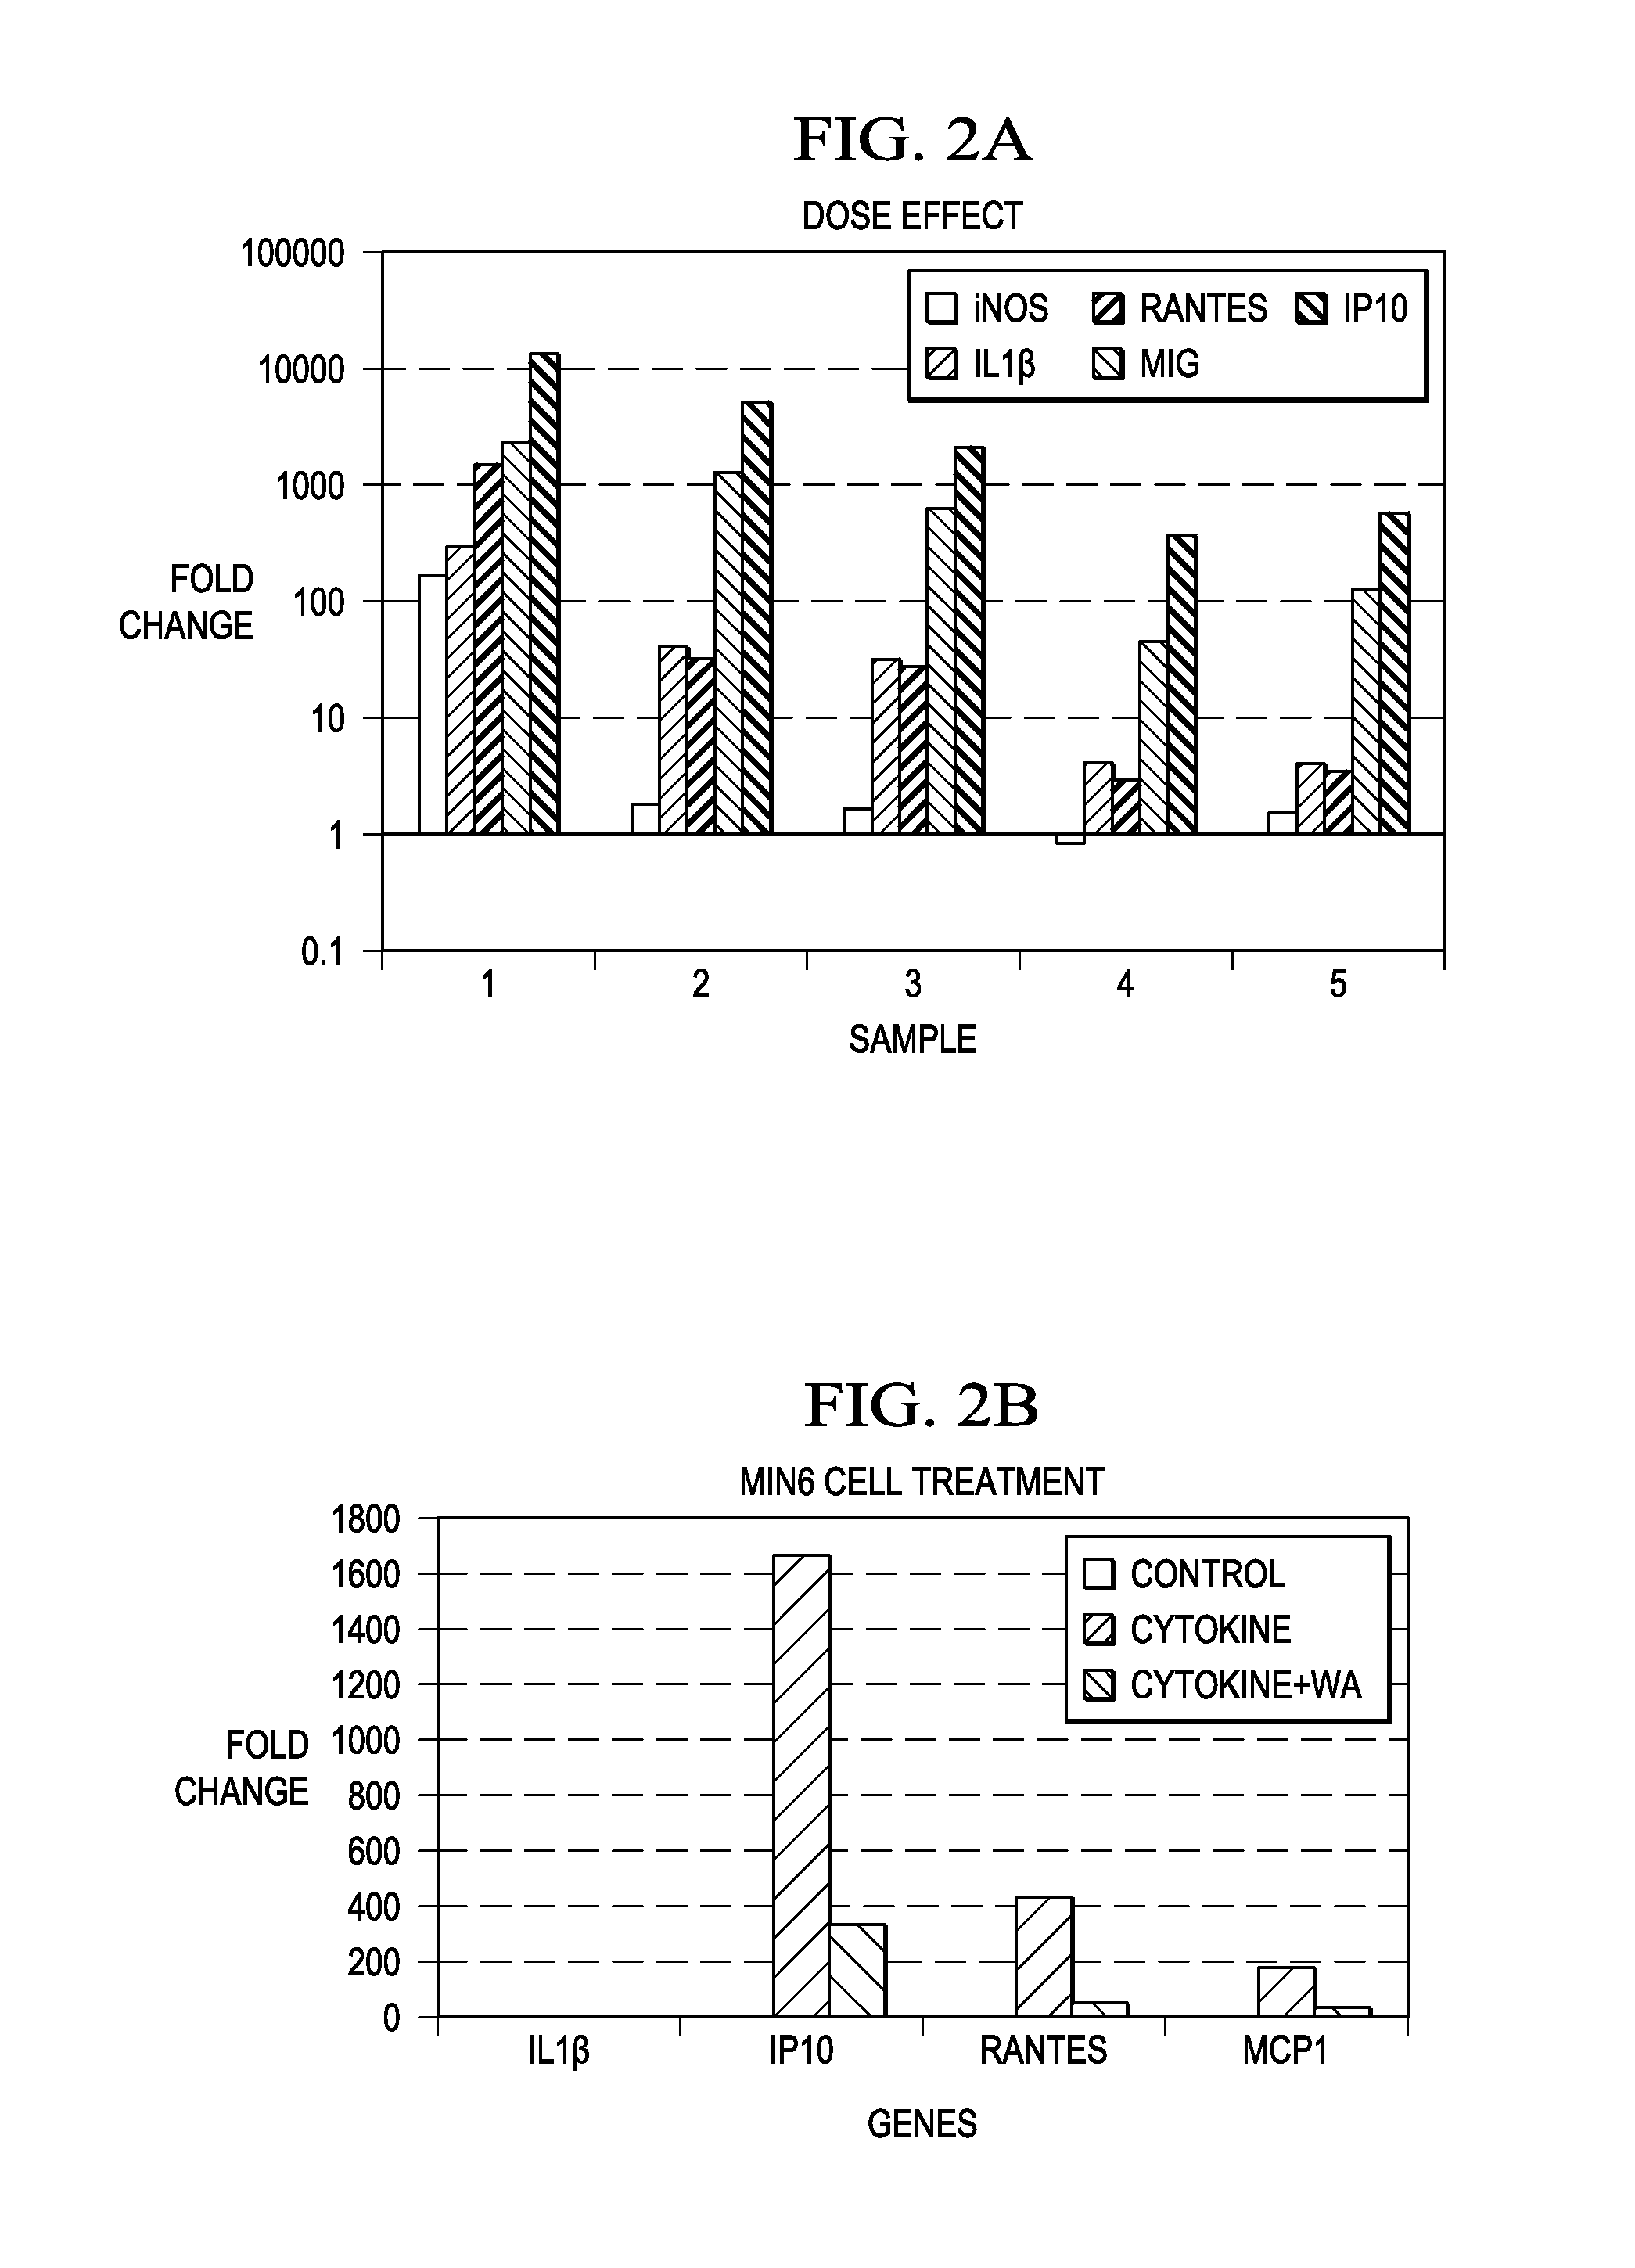 Method of achieving normoglycemia in diabetics by administration of Withaferin A